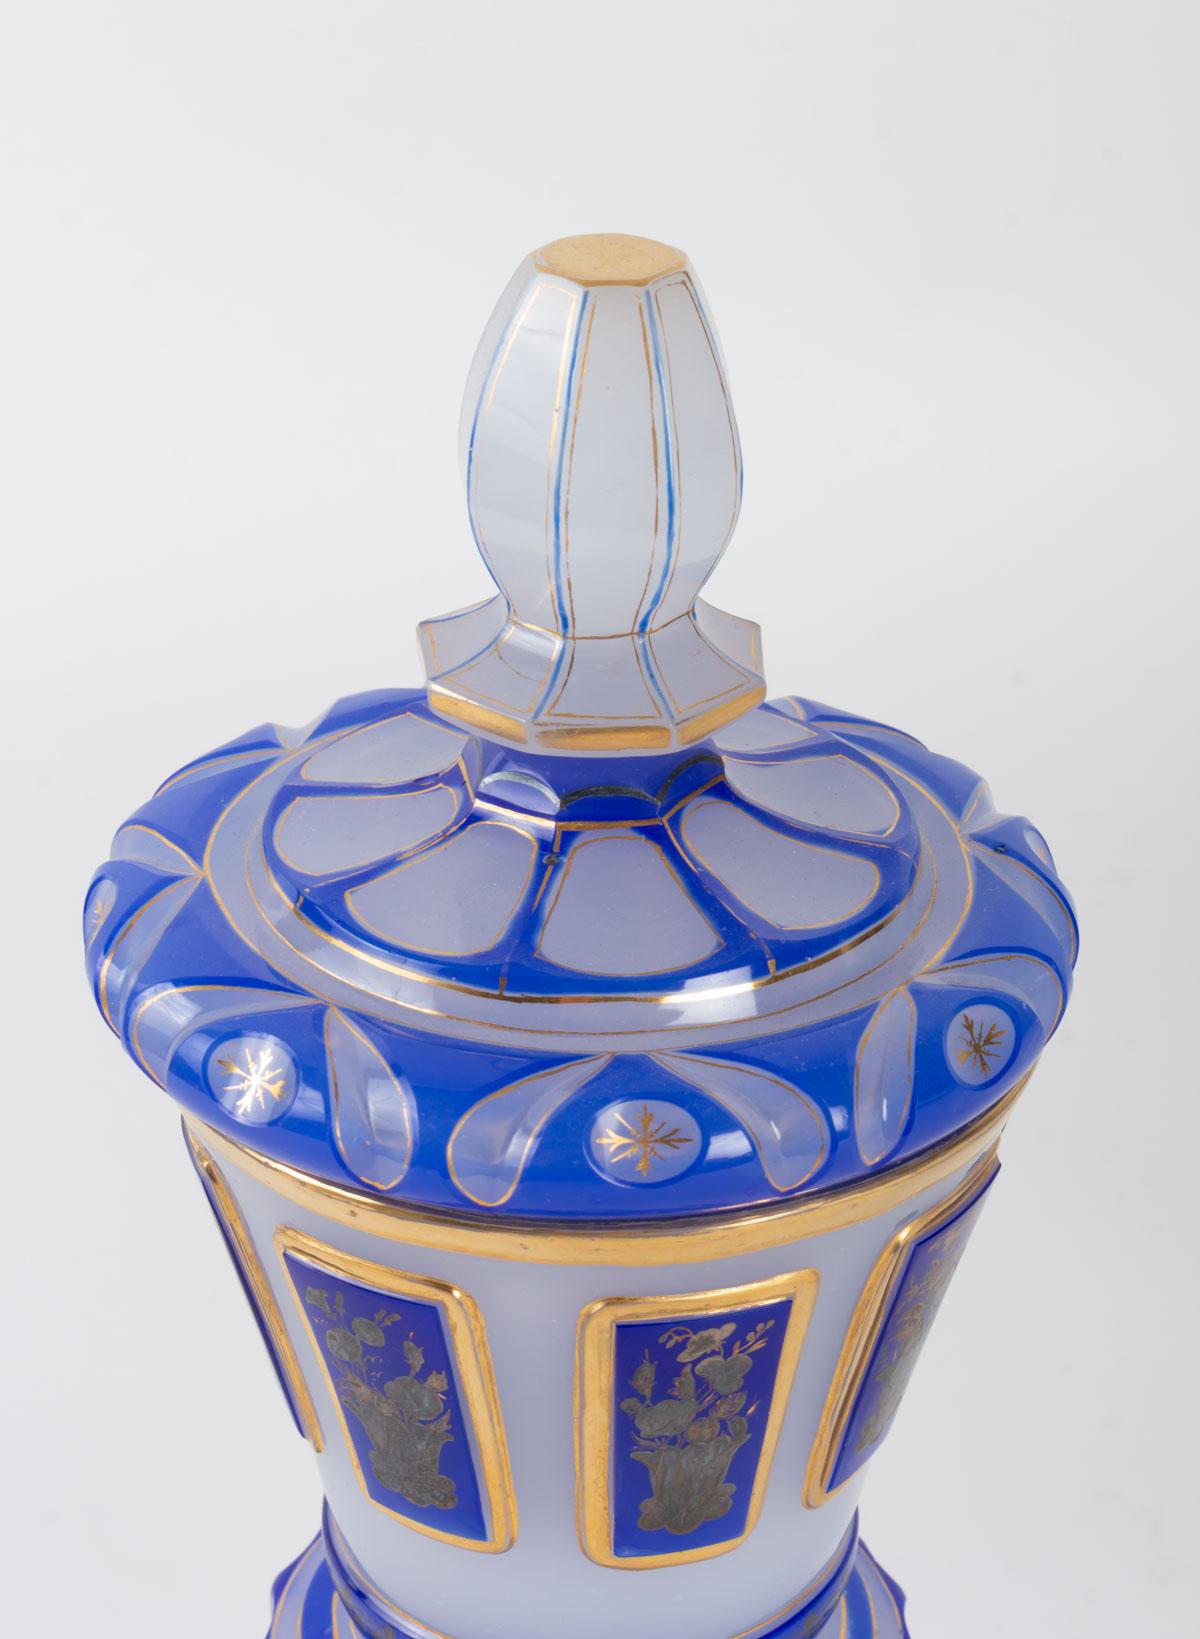 Goblet in overley, 19th century, 1840-1860 with enamelled and gold plate

Measures: H 29cm, D 12cm.